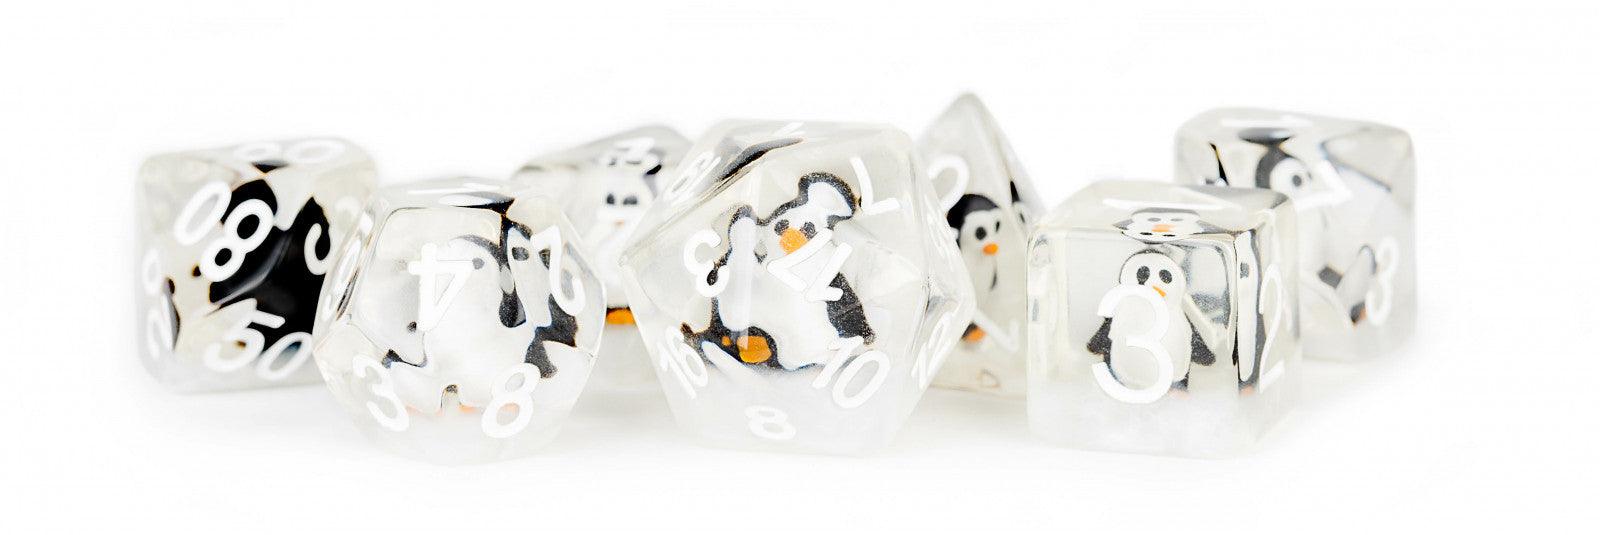 VR-91826 MDG Resin 16mm Polyhedral Dice Set - Penguin - FanRoll by Metallic Dice Games - Titan Pop Culture